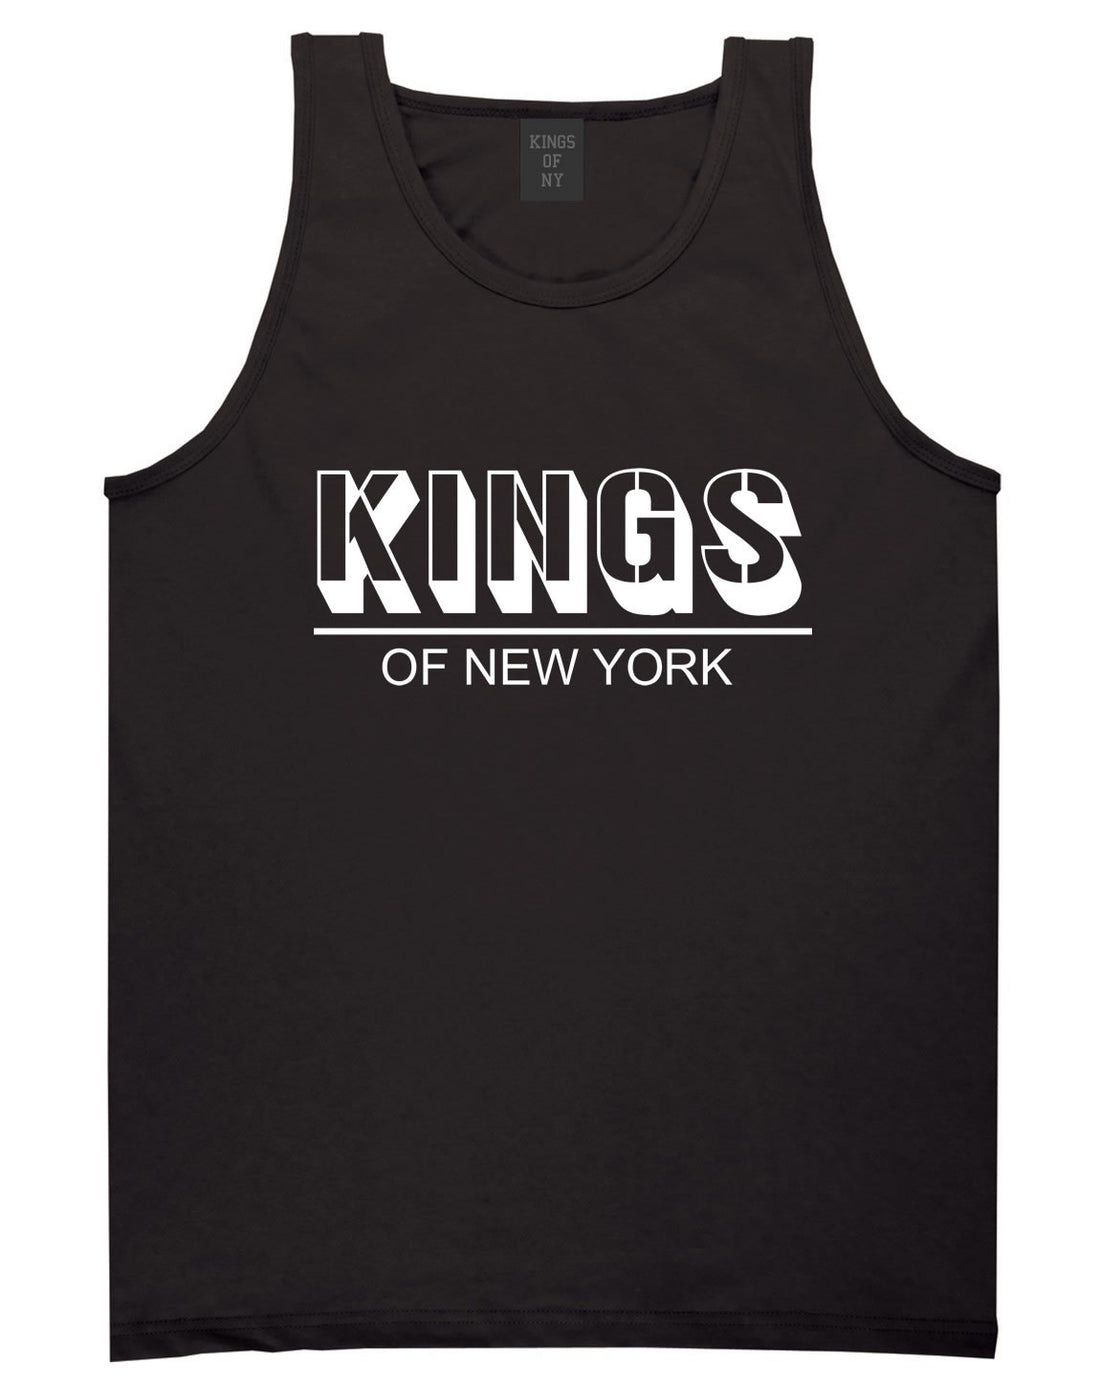 King Branded Block Letters Tank Top in Black by Kings Of NY